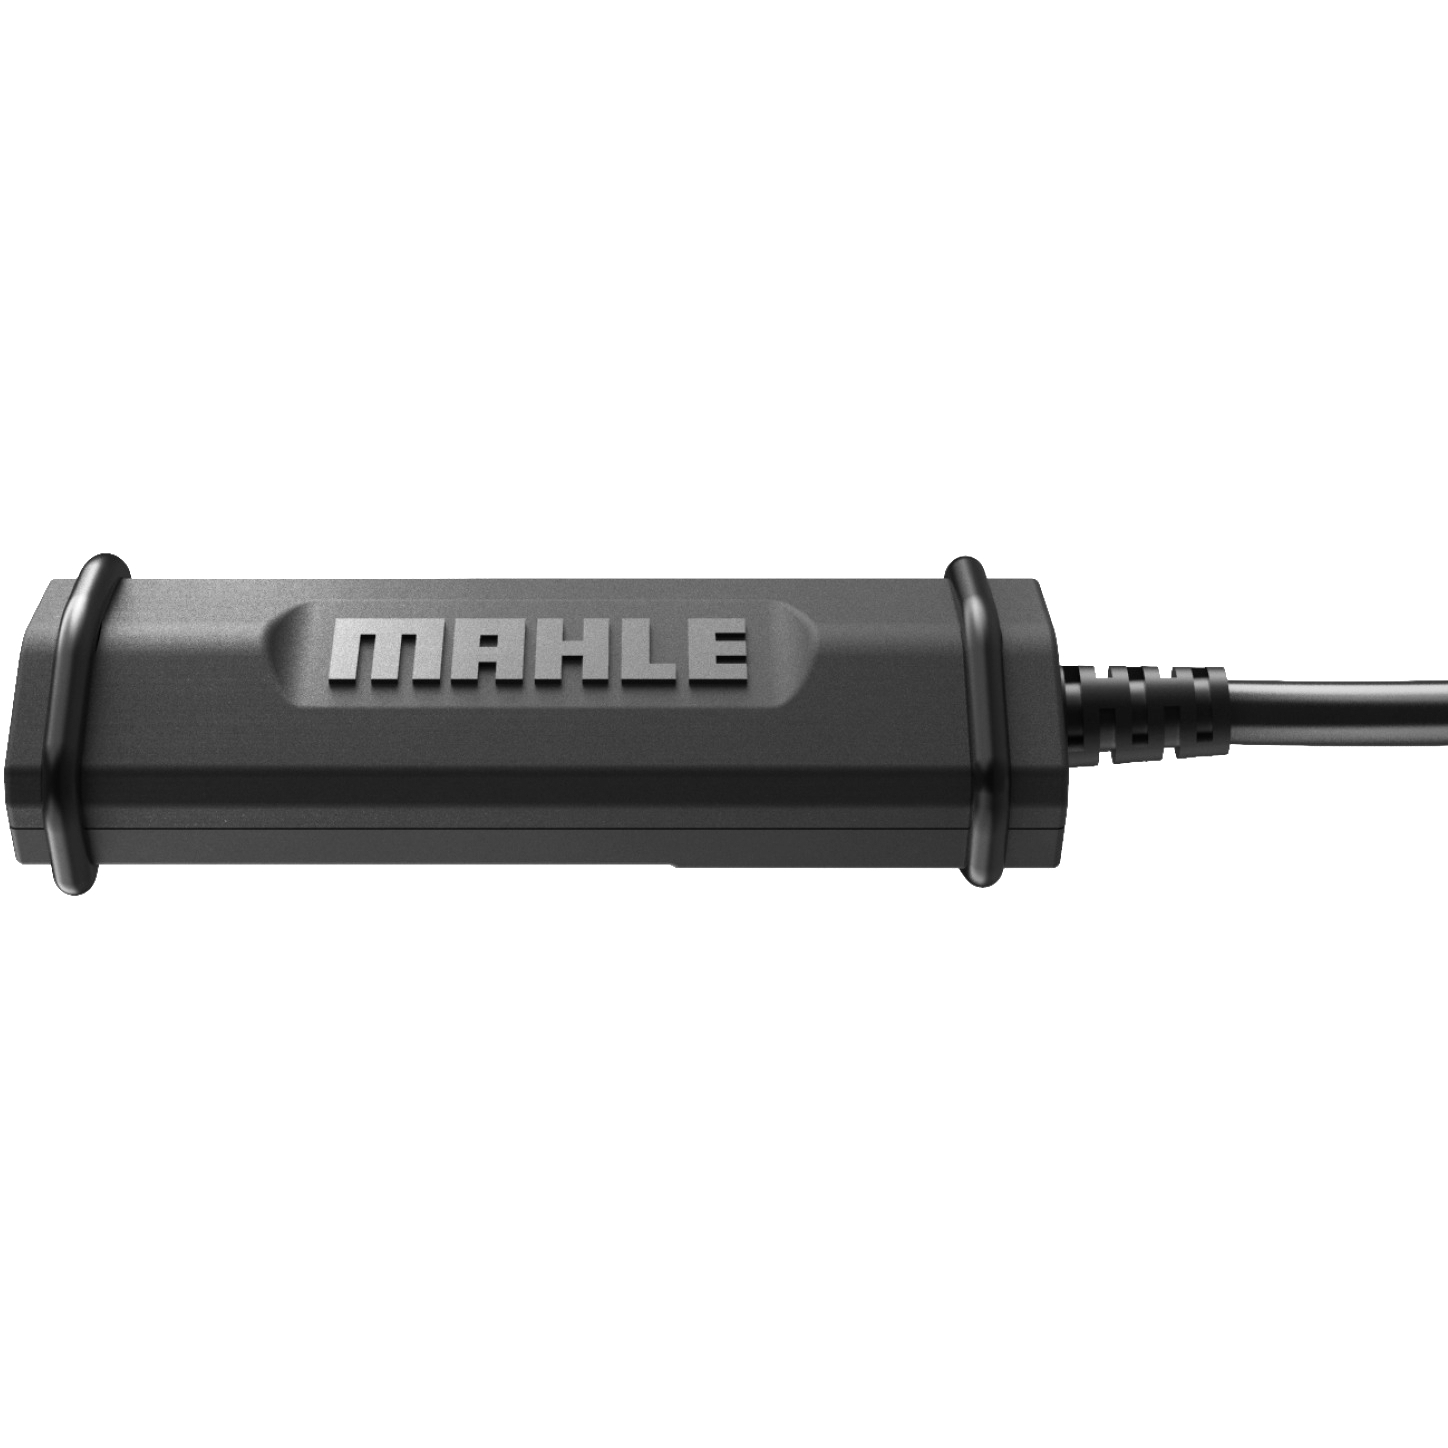 Picture of MAHLE X35 ANT+ Dongle - GXA10000000000